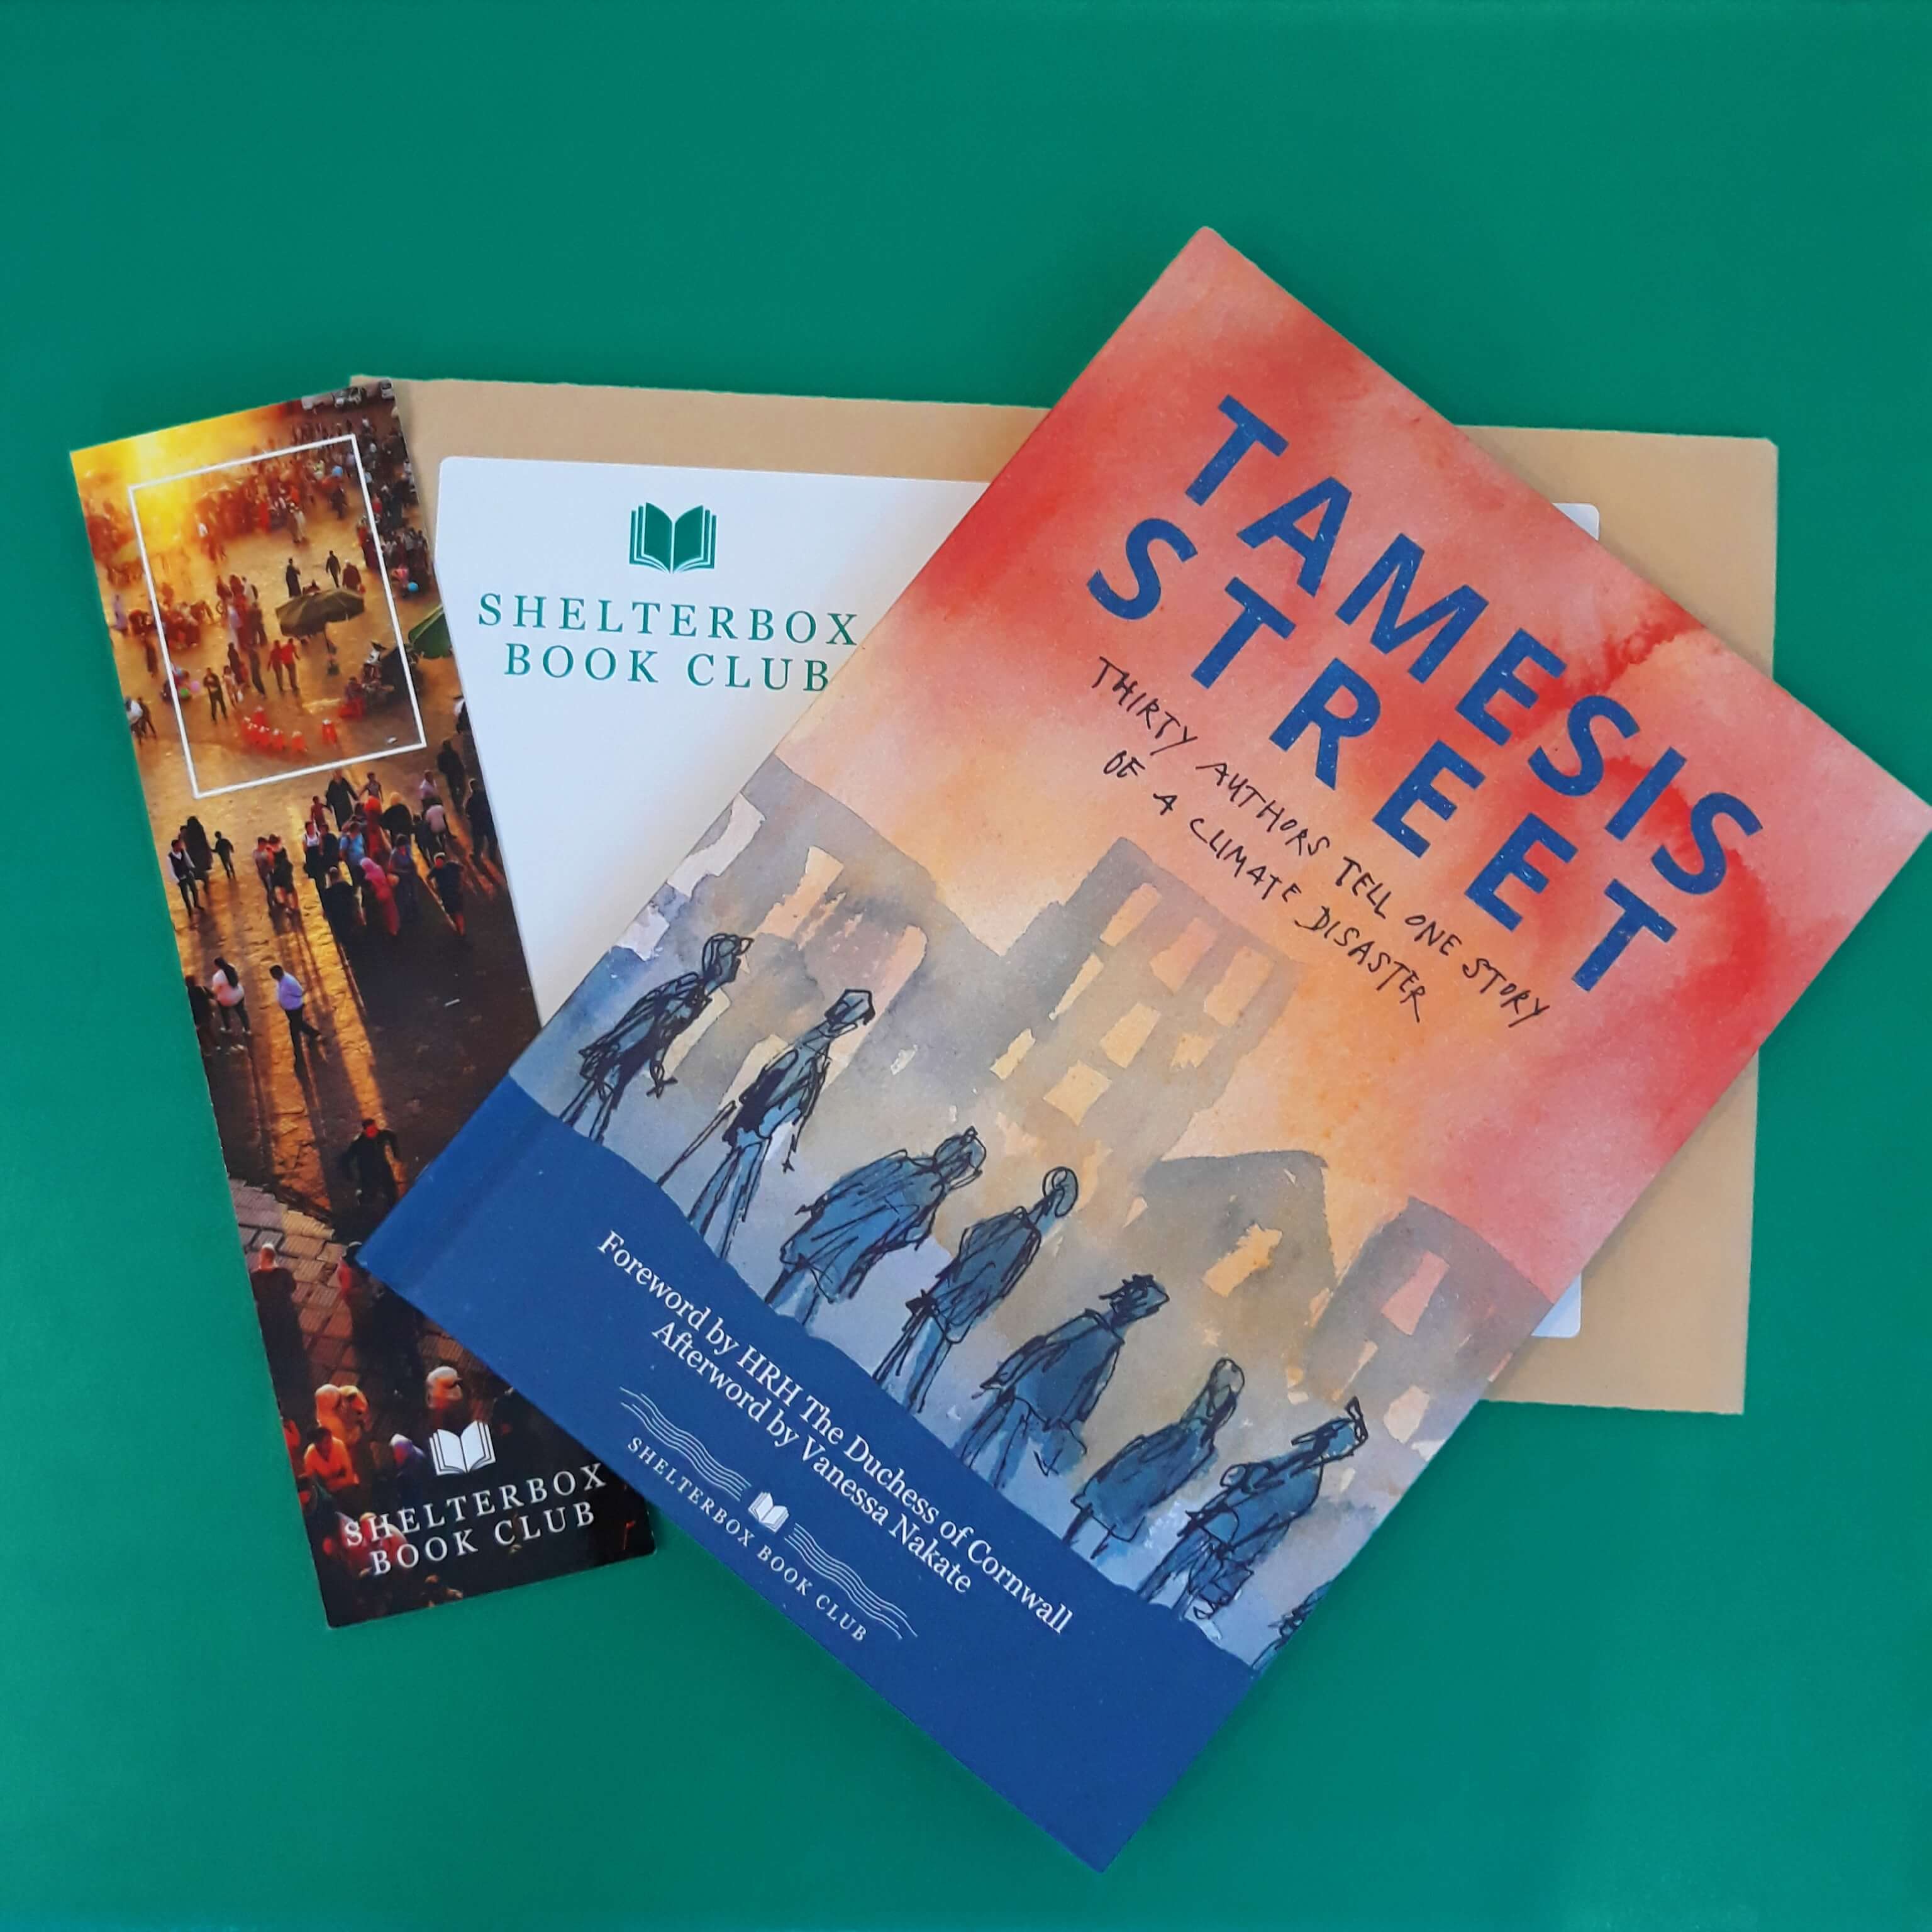 tamesis street book cover with ShelterBox book club envelope and bookmark